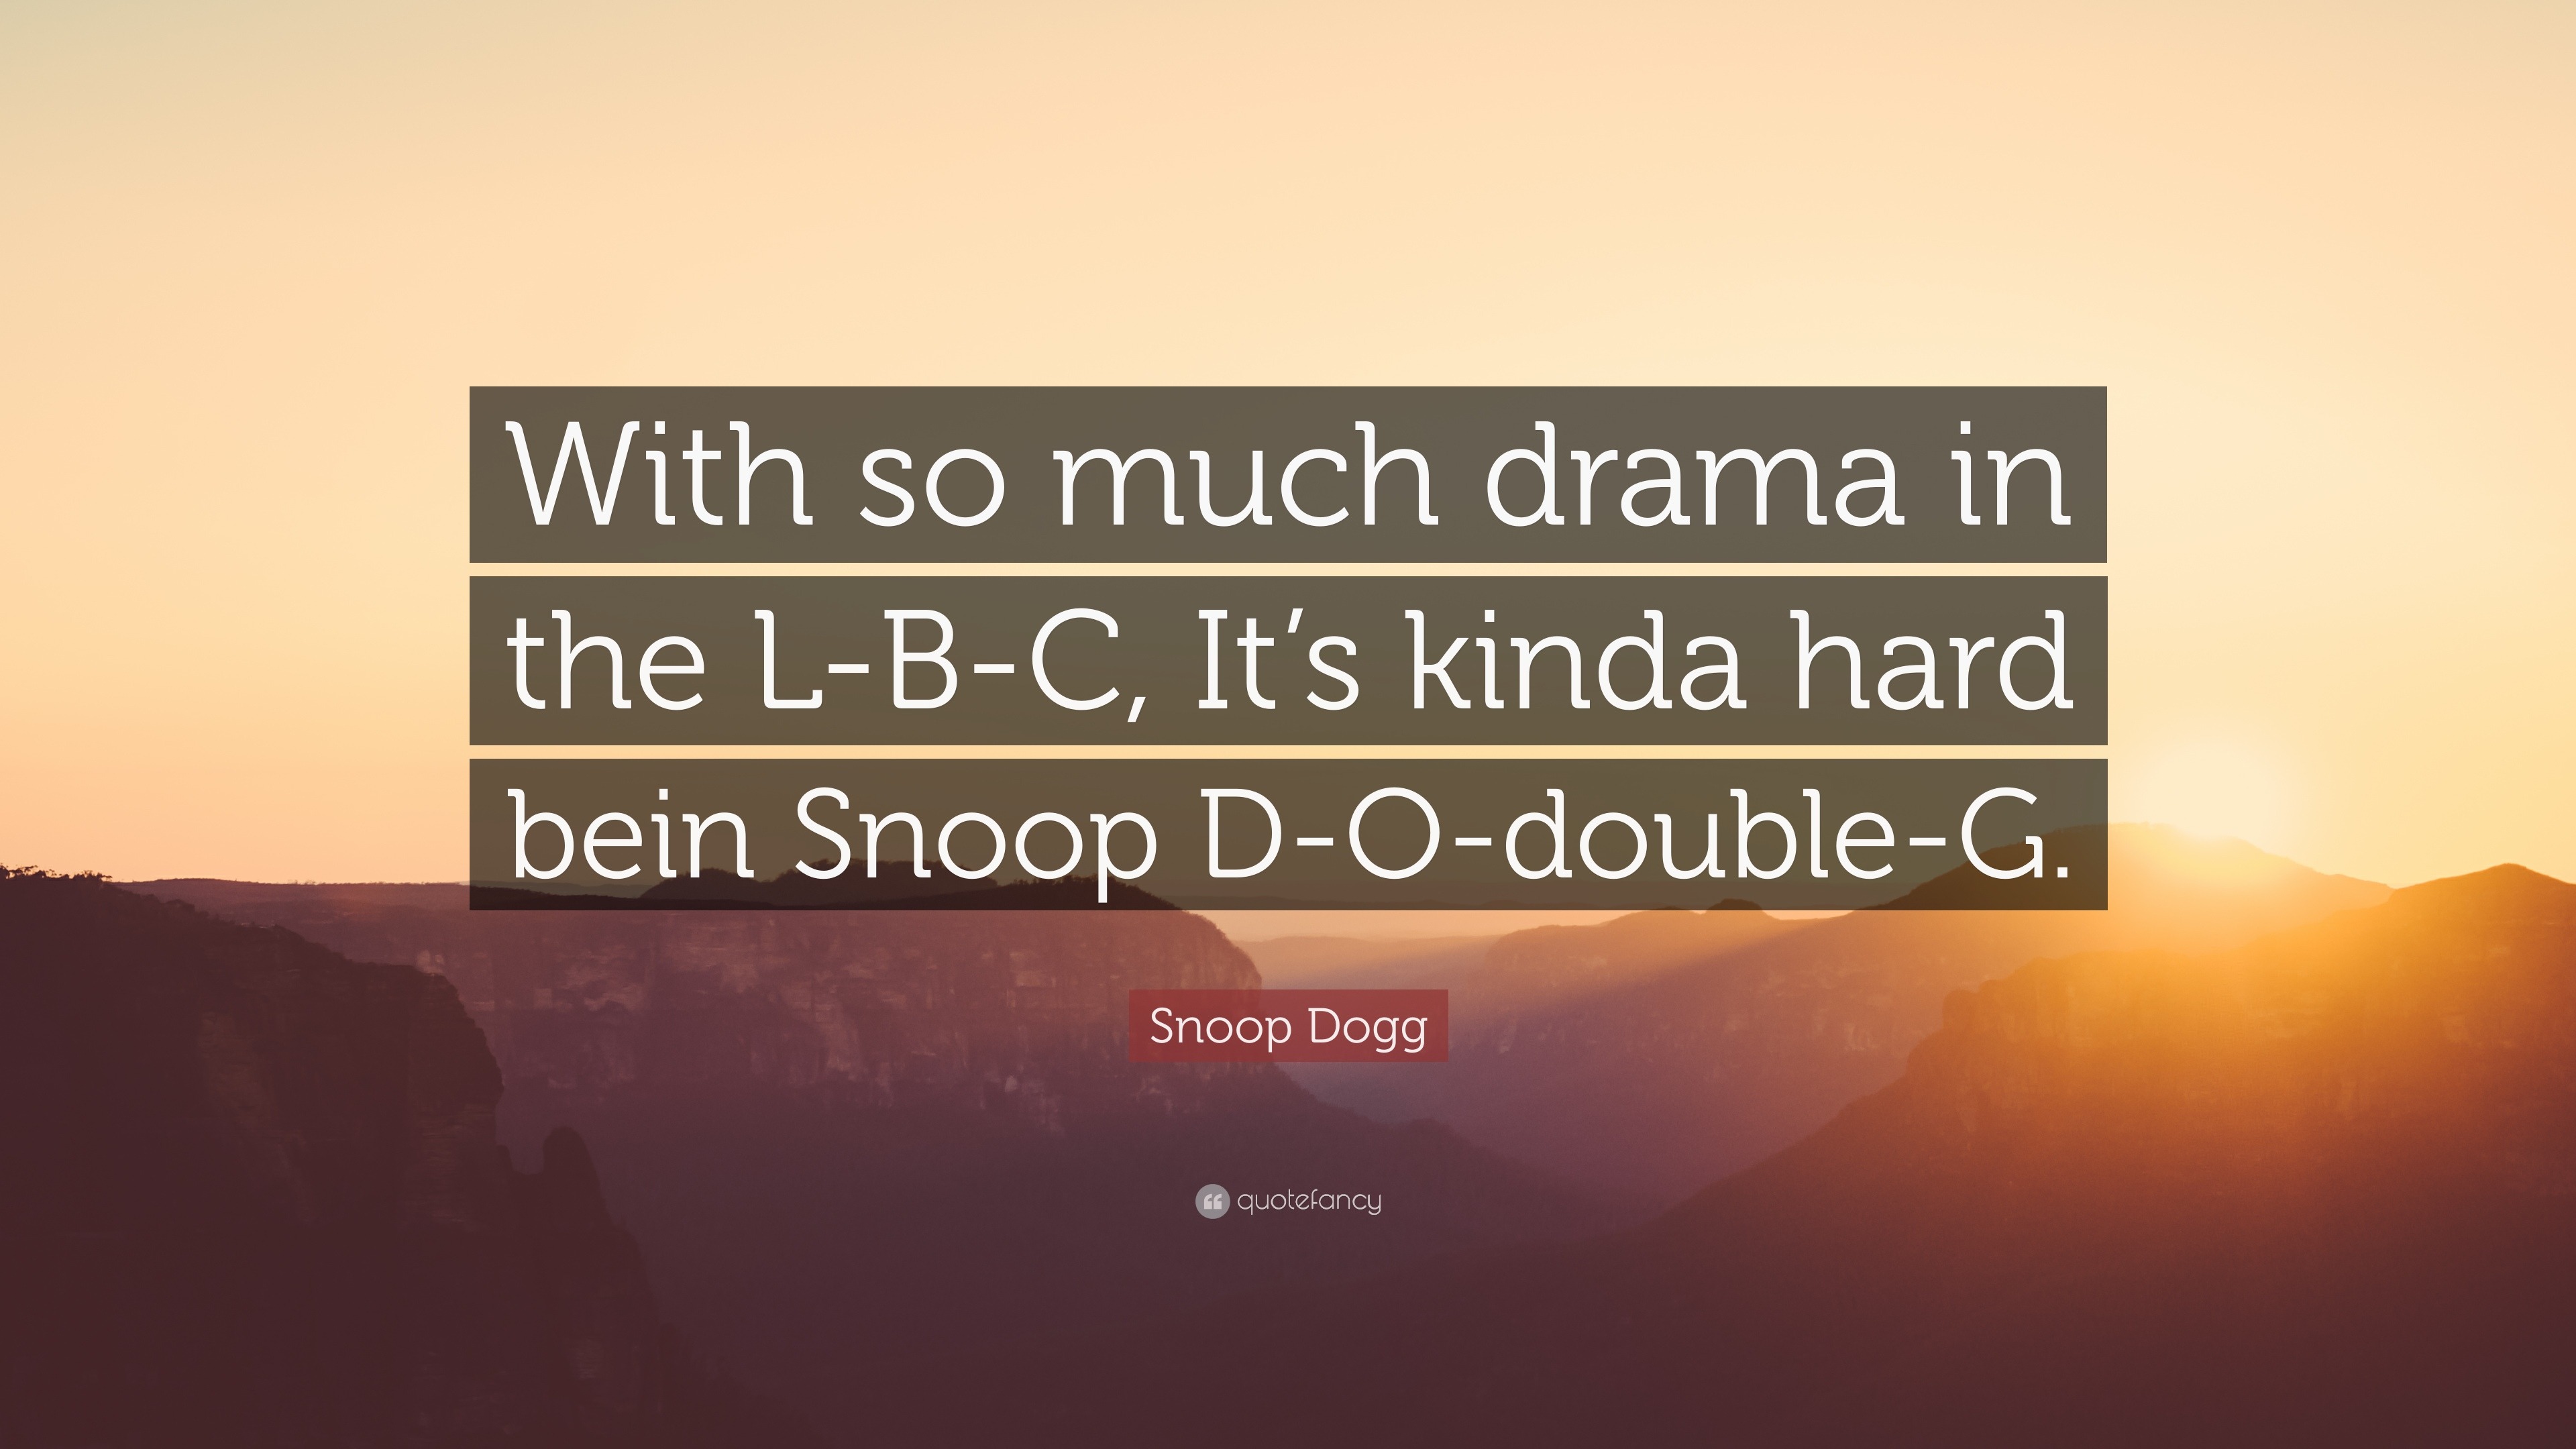 Snoop Dogg Quote: “With in the L-B-C, It's kinda hard Snoop D-O-